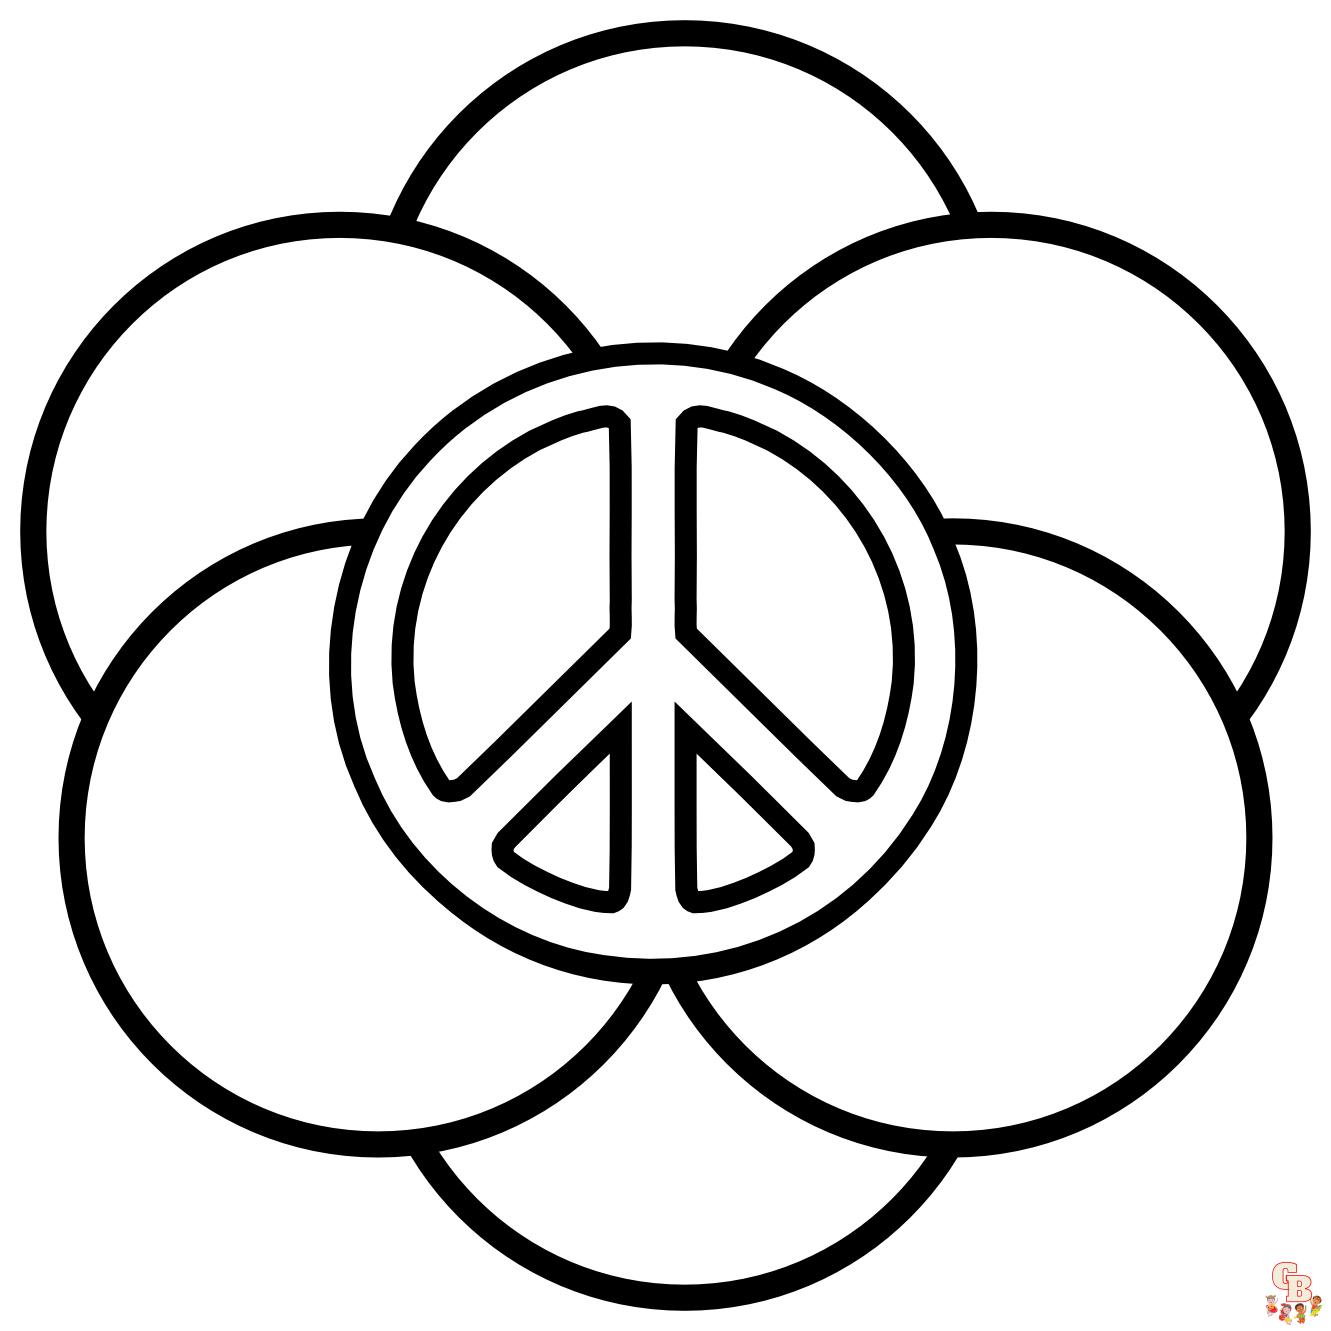 Free peace coloring pages